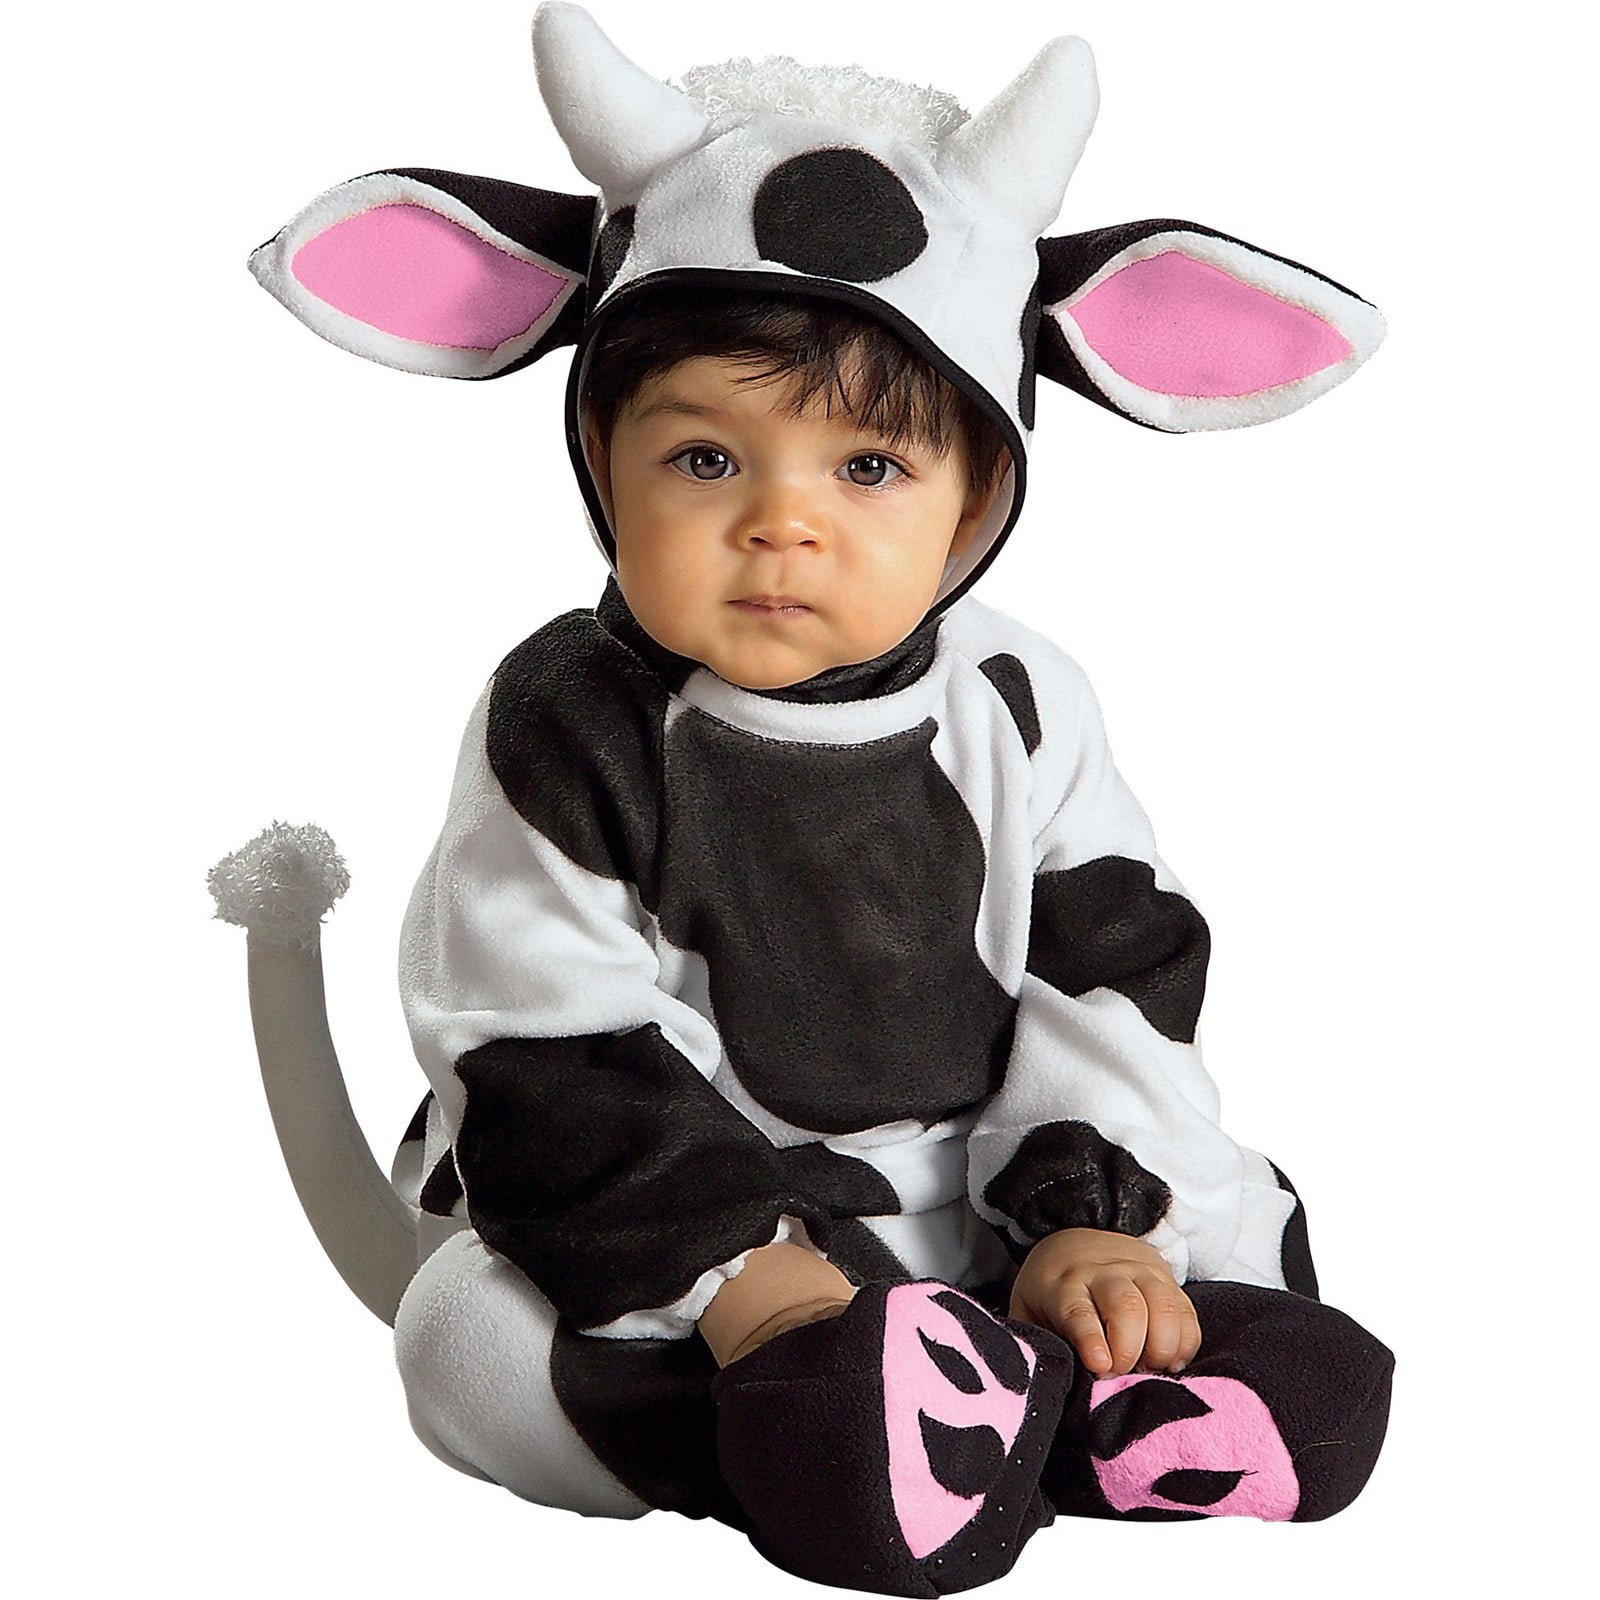 Dress Up America Pink Bunny Rabbit Costume Halloween Infant Animal Baby Outfit 